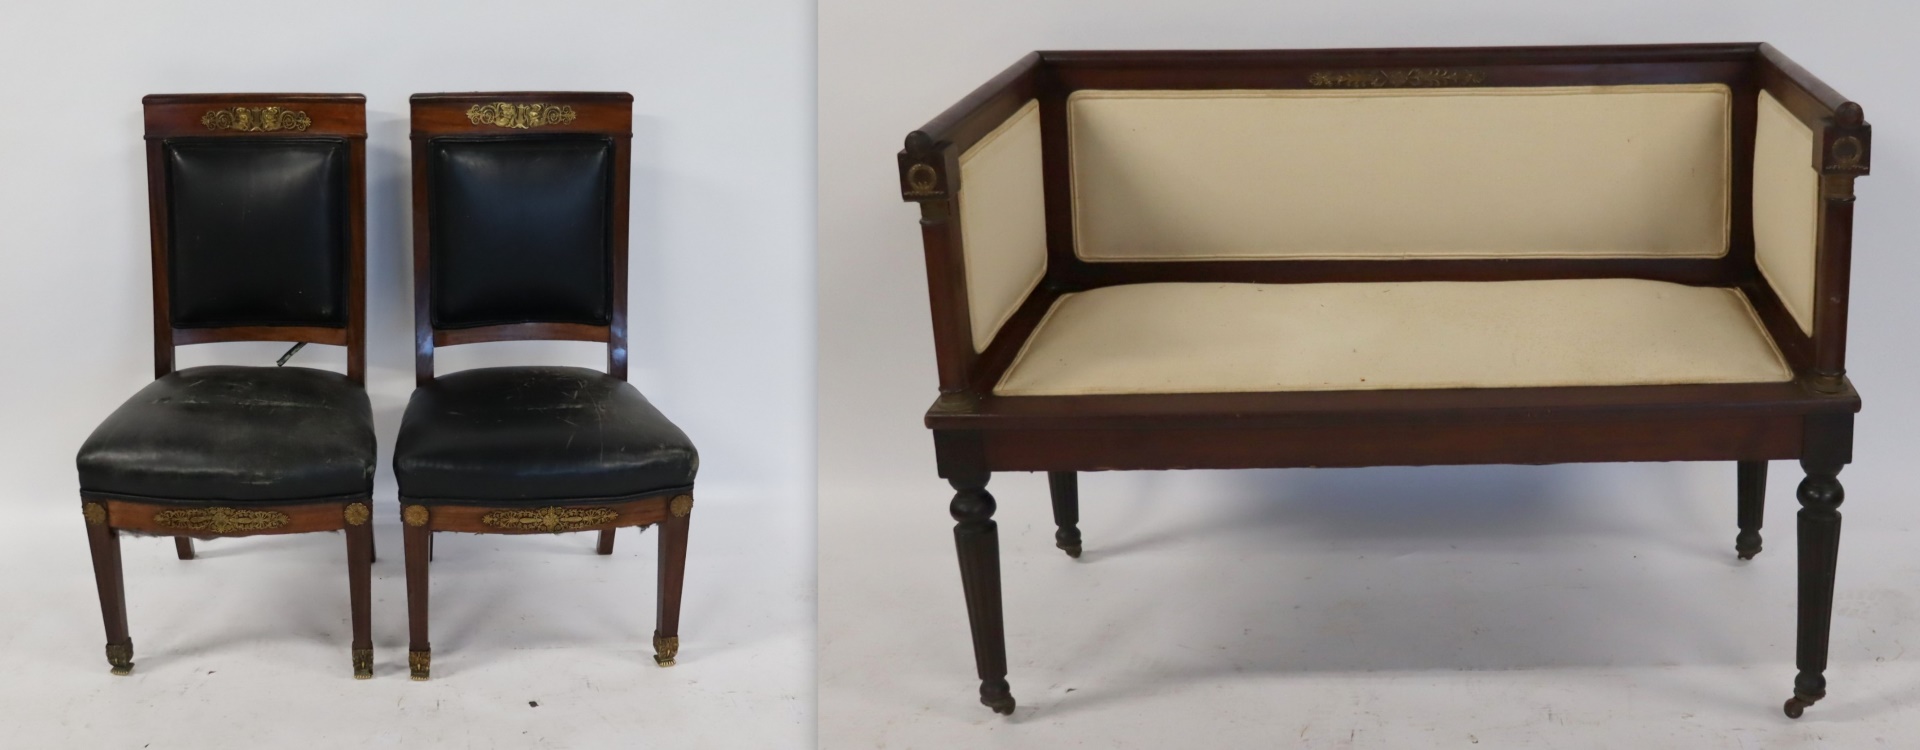 ANTIQUE EMPIRE STYLE SETTEE PAIR 3be962